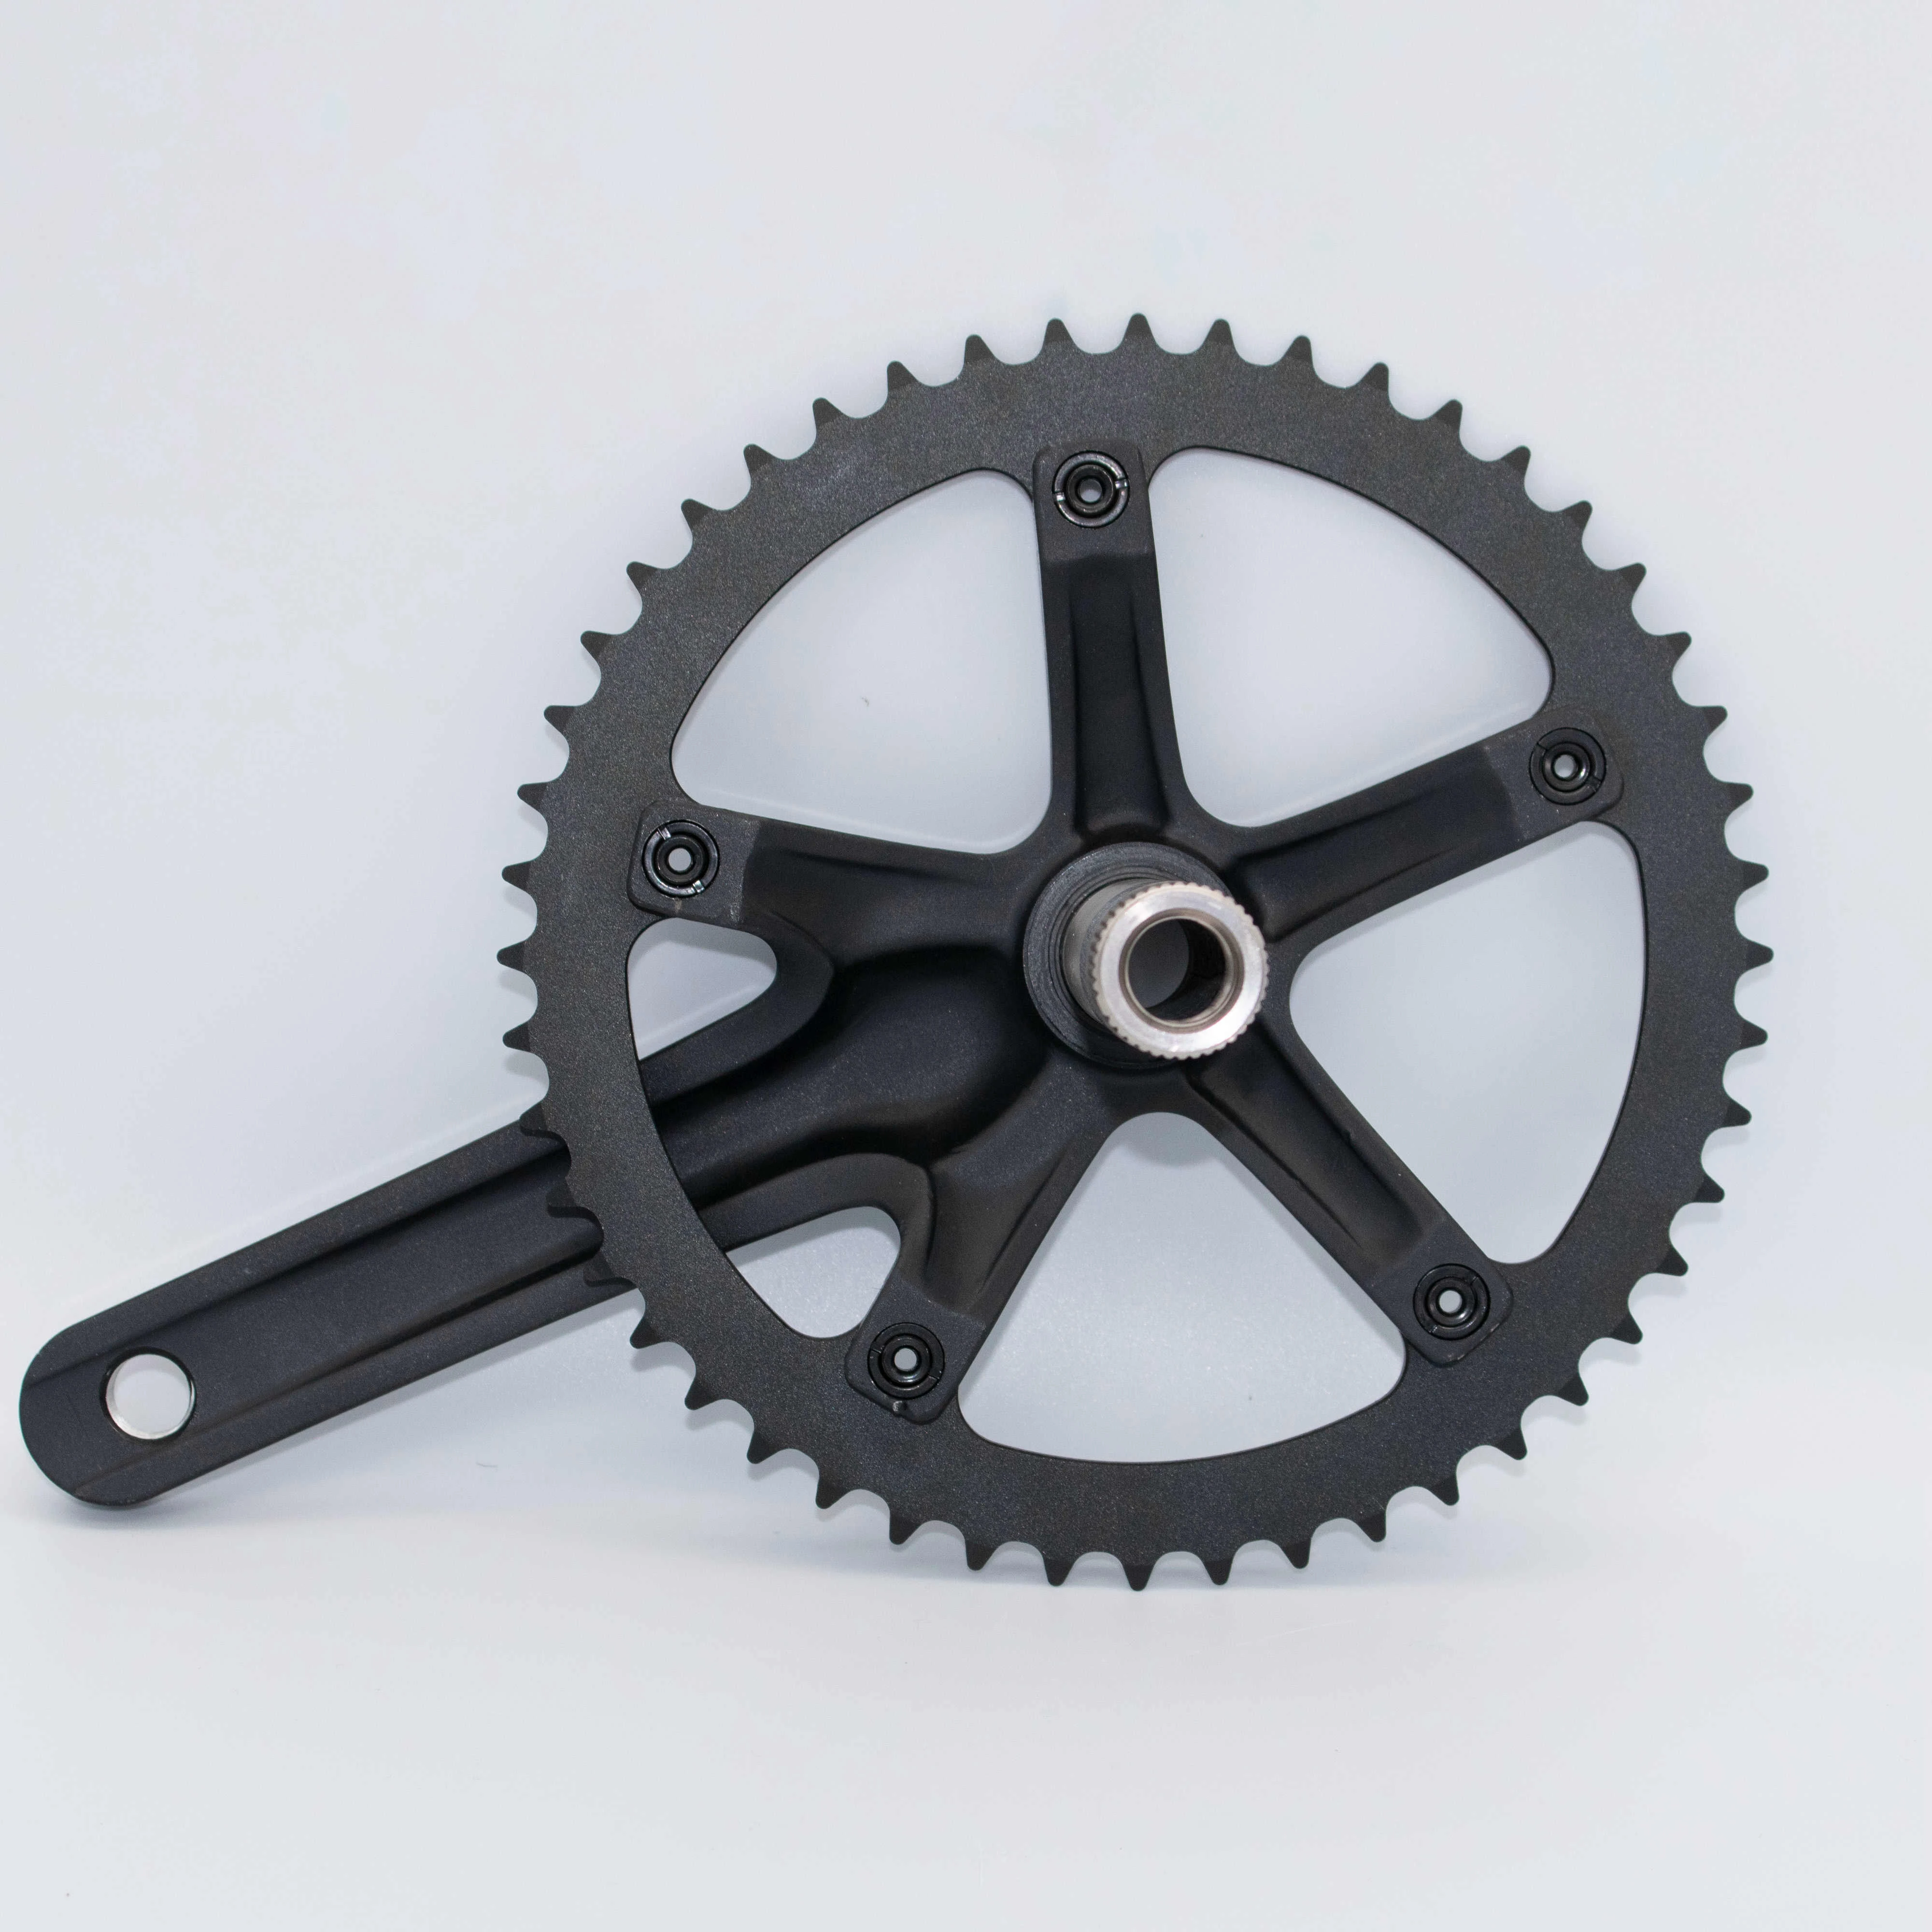 Chainwheel Folding bike/bicyc Integrated Crank 48T Track Cycle  Bicycle Parts Fixie Bicycle Crankset with bb